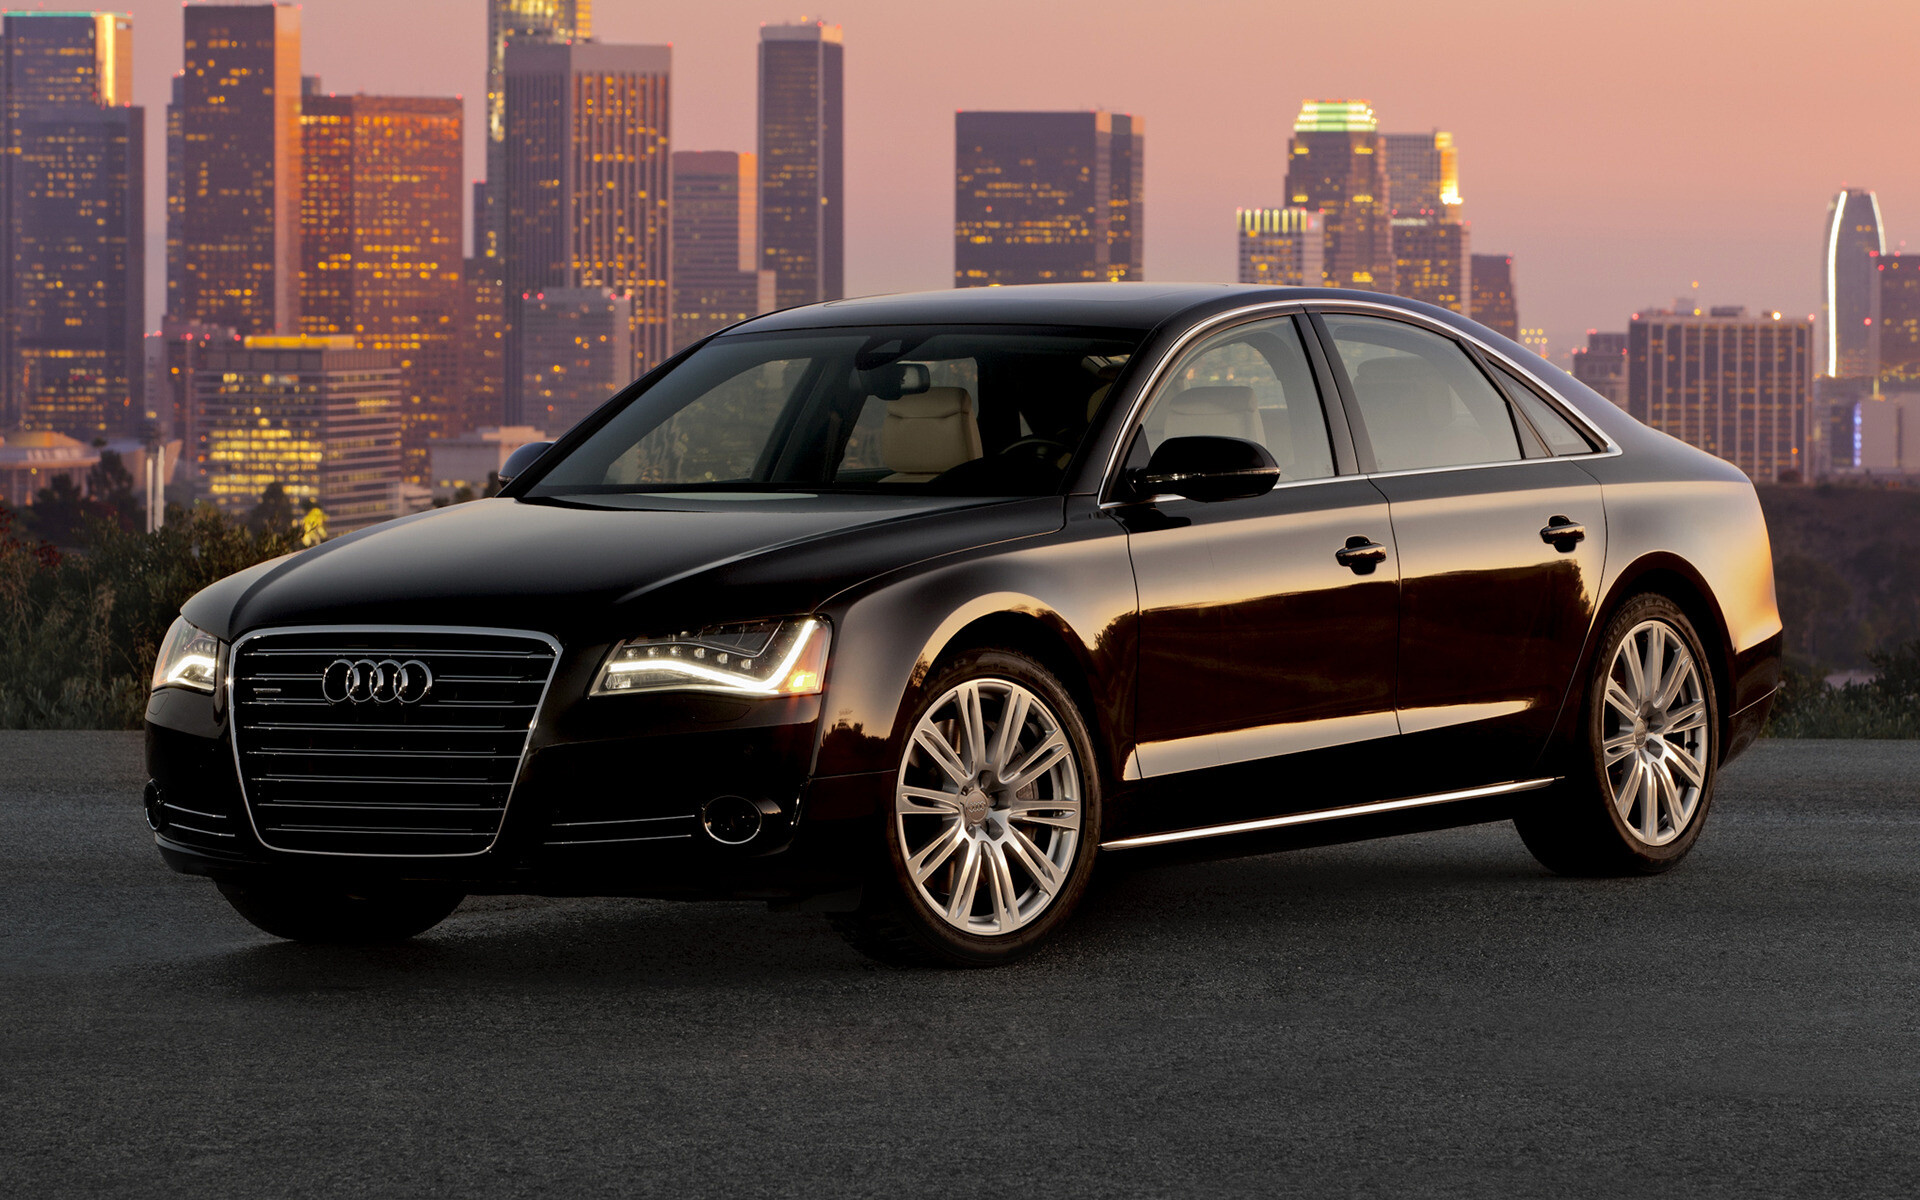 Audi A8: German luxury car manufacturer, Turbocharged V-6 rated at 335 horsepower. 1920x1200 HD Background.